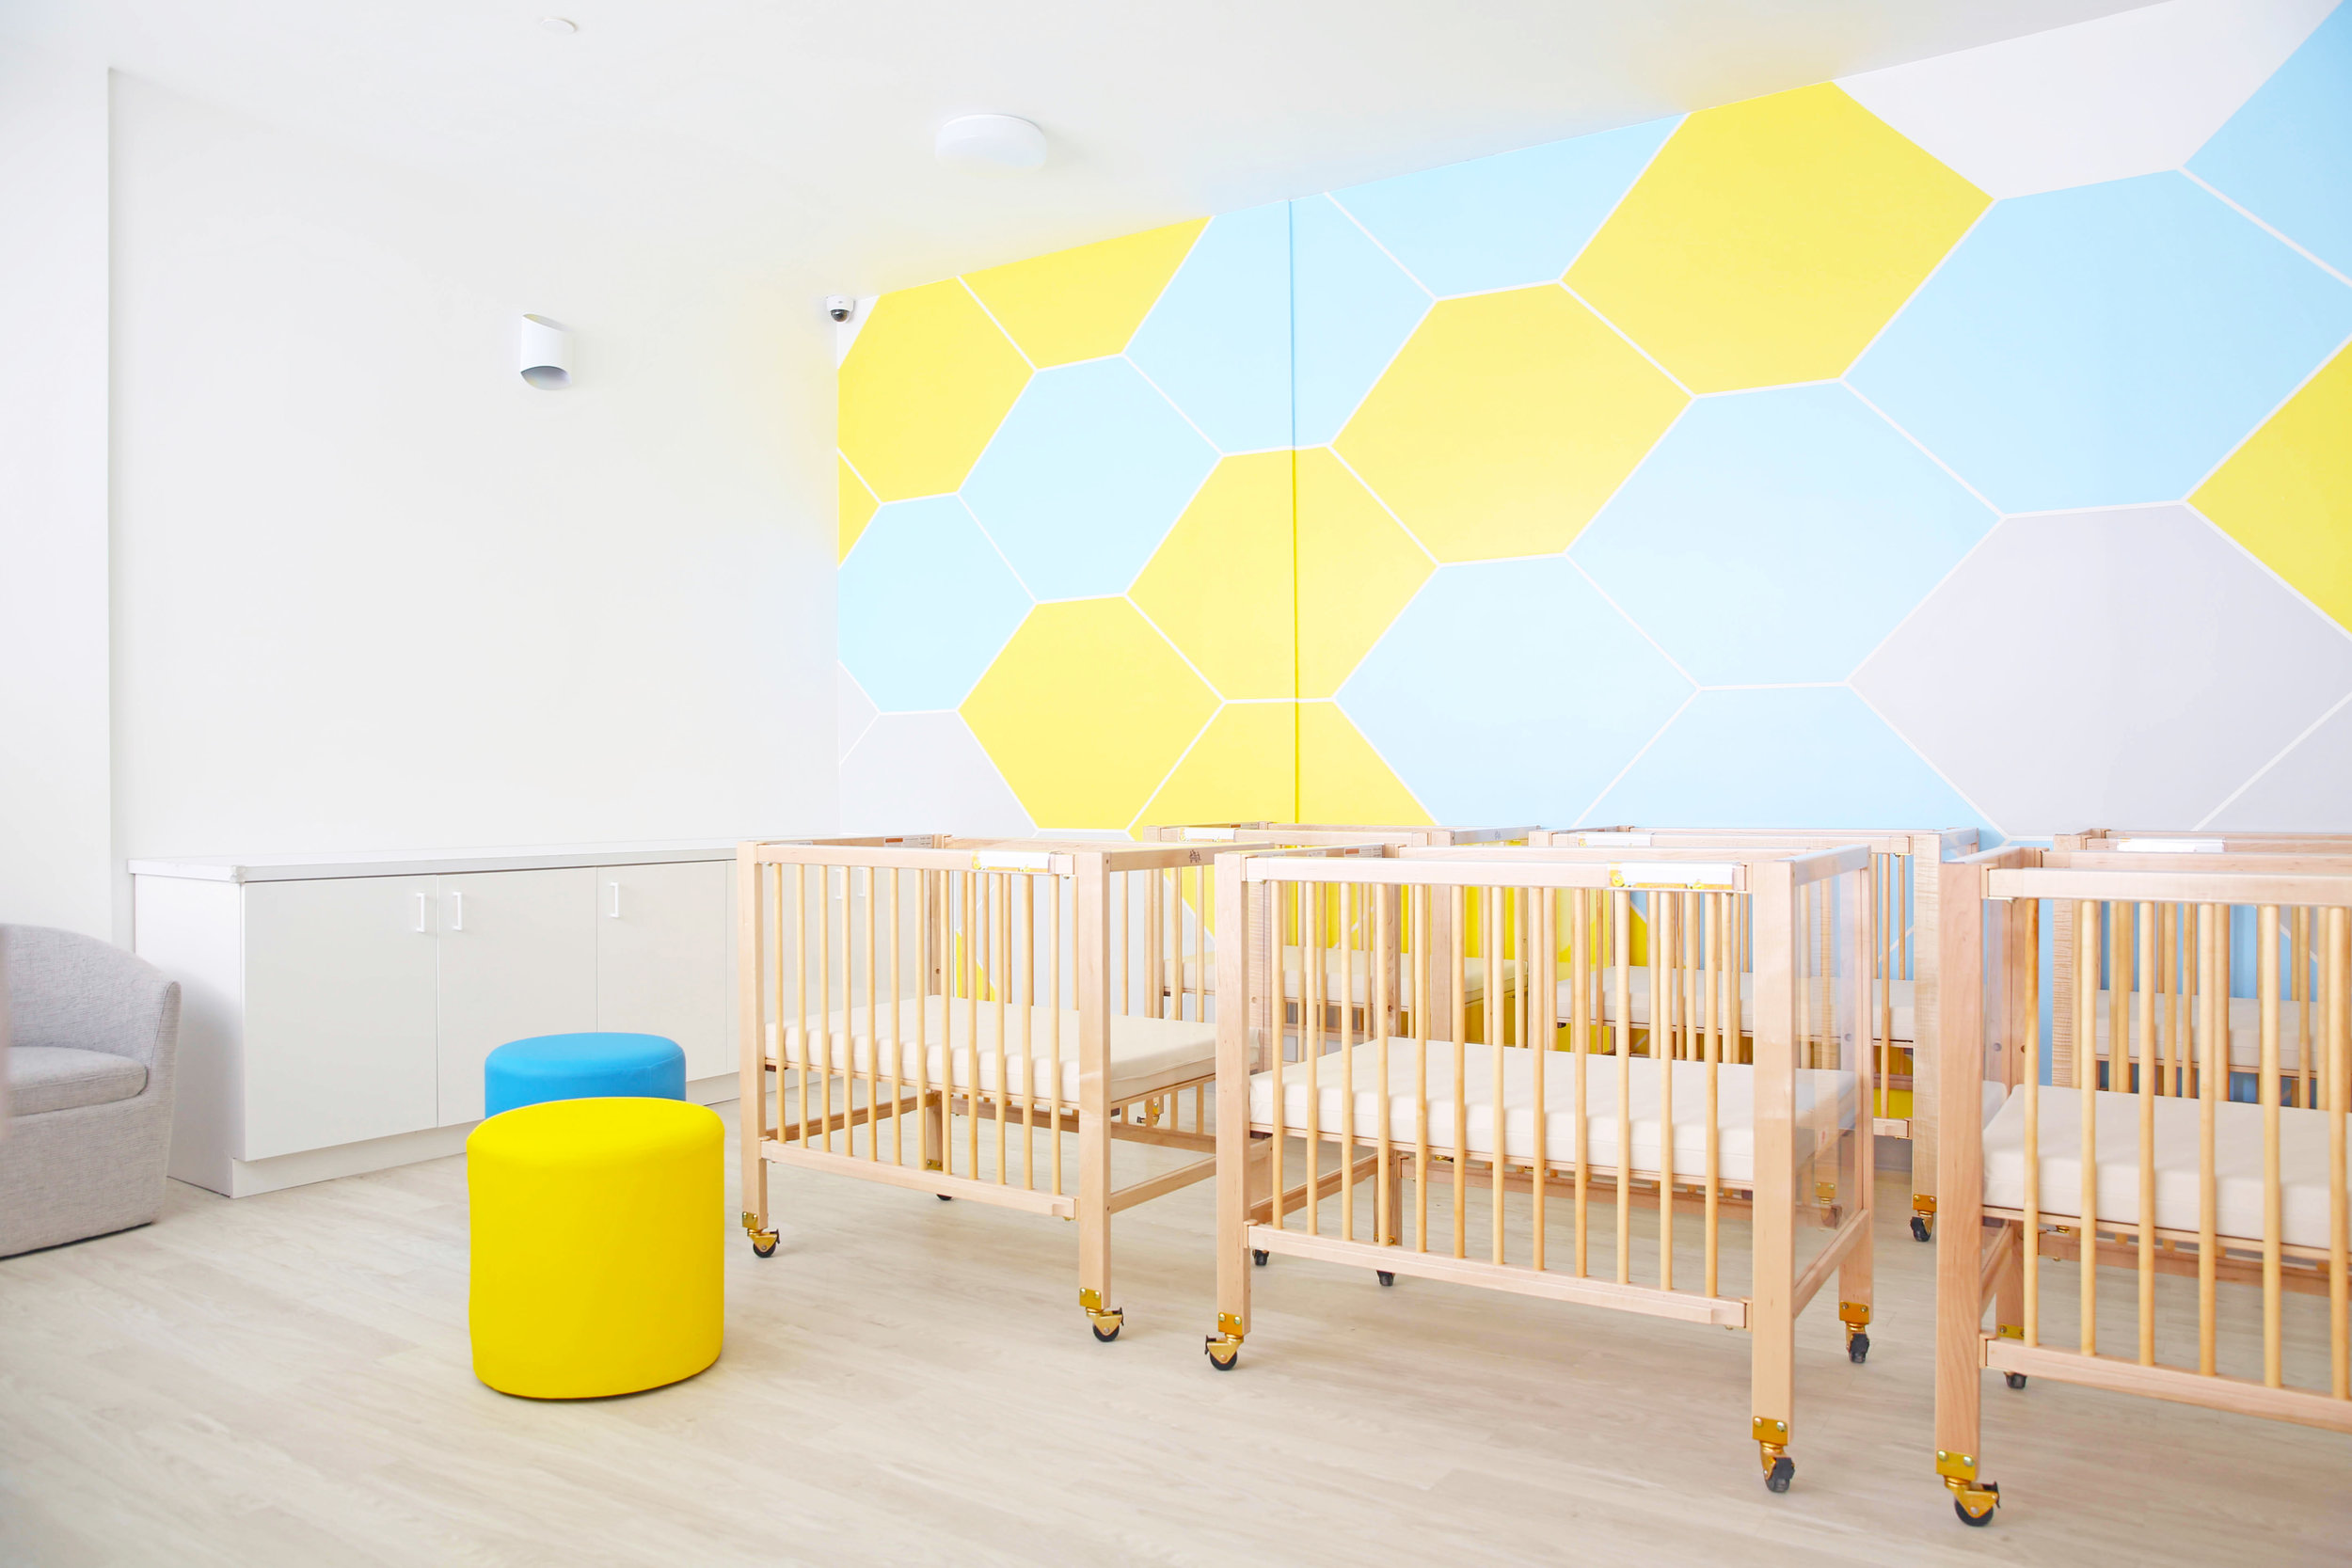  Daycare interior design project. Gut renovation of a former thrift shop.&nbsp;&nbsp;Modern, minimal interiors.  Photo credit: Niya Bascom Photography. &nbsp;Please do not use images without express written permission from Ishka Designs or Niya Basco